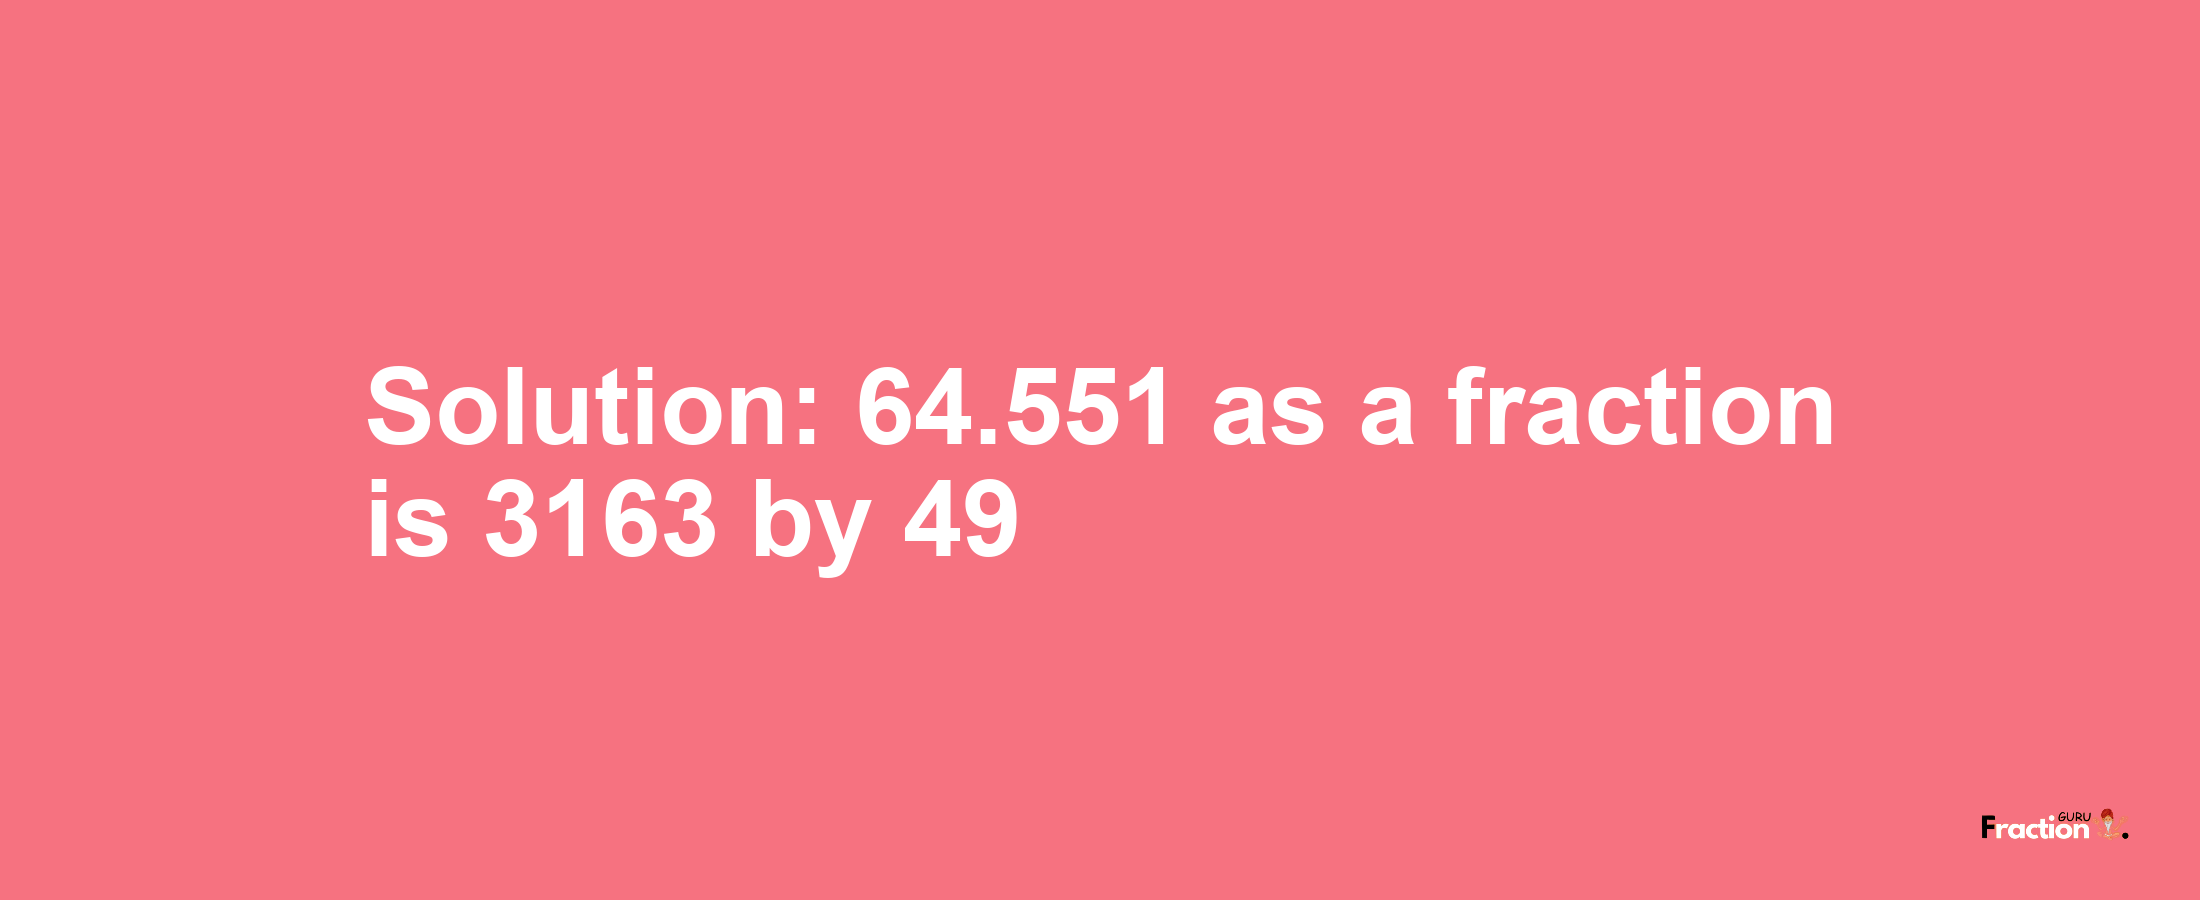 Solution:64.551 as a fraction is 3163/49